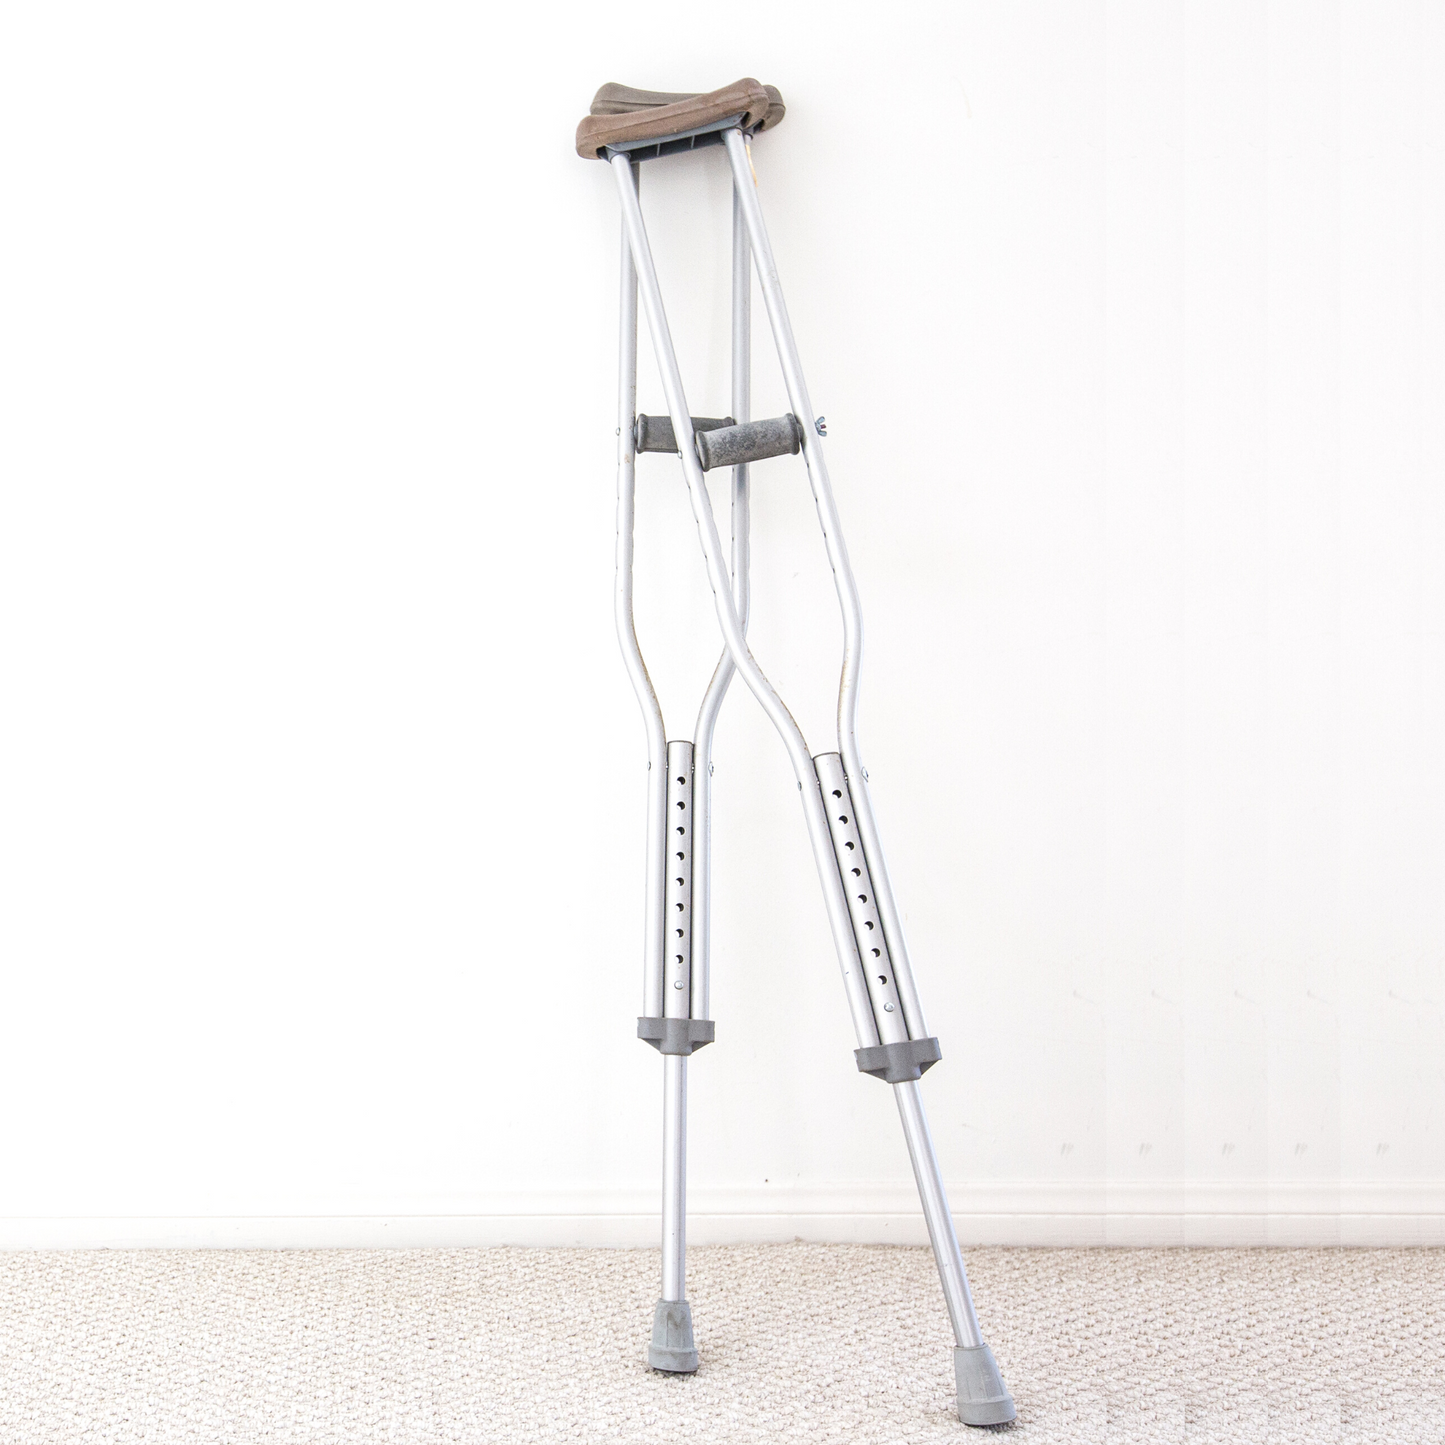 Underarm Crutches - Bettacare Mobility